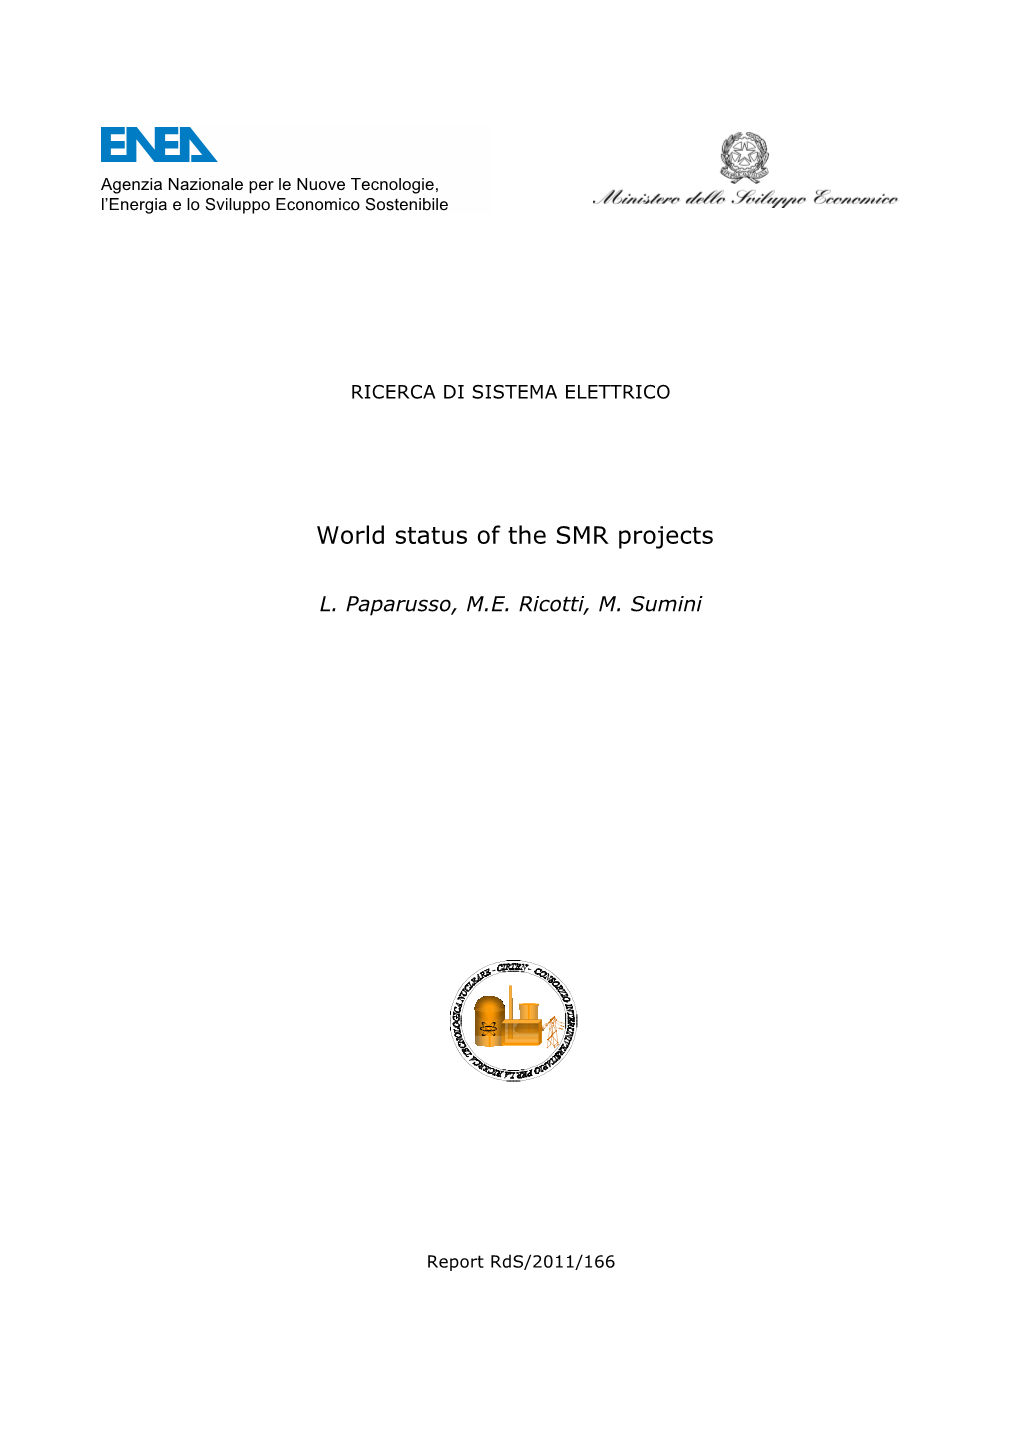 World Status of the SMR Projects